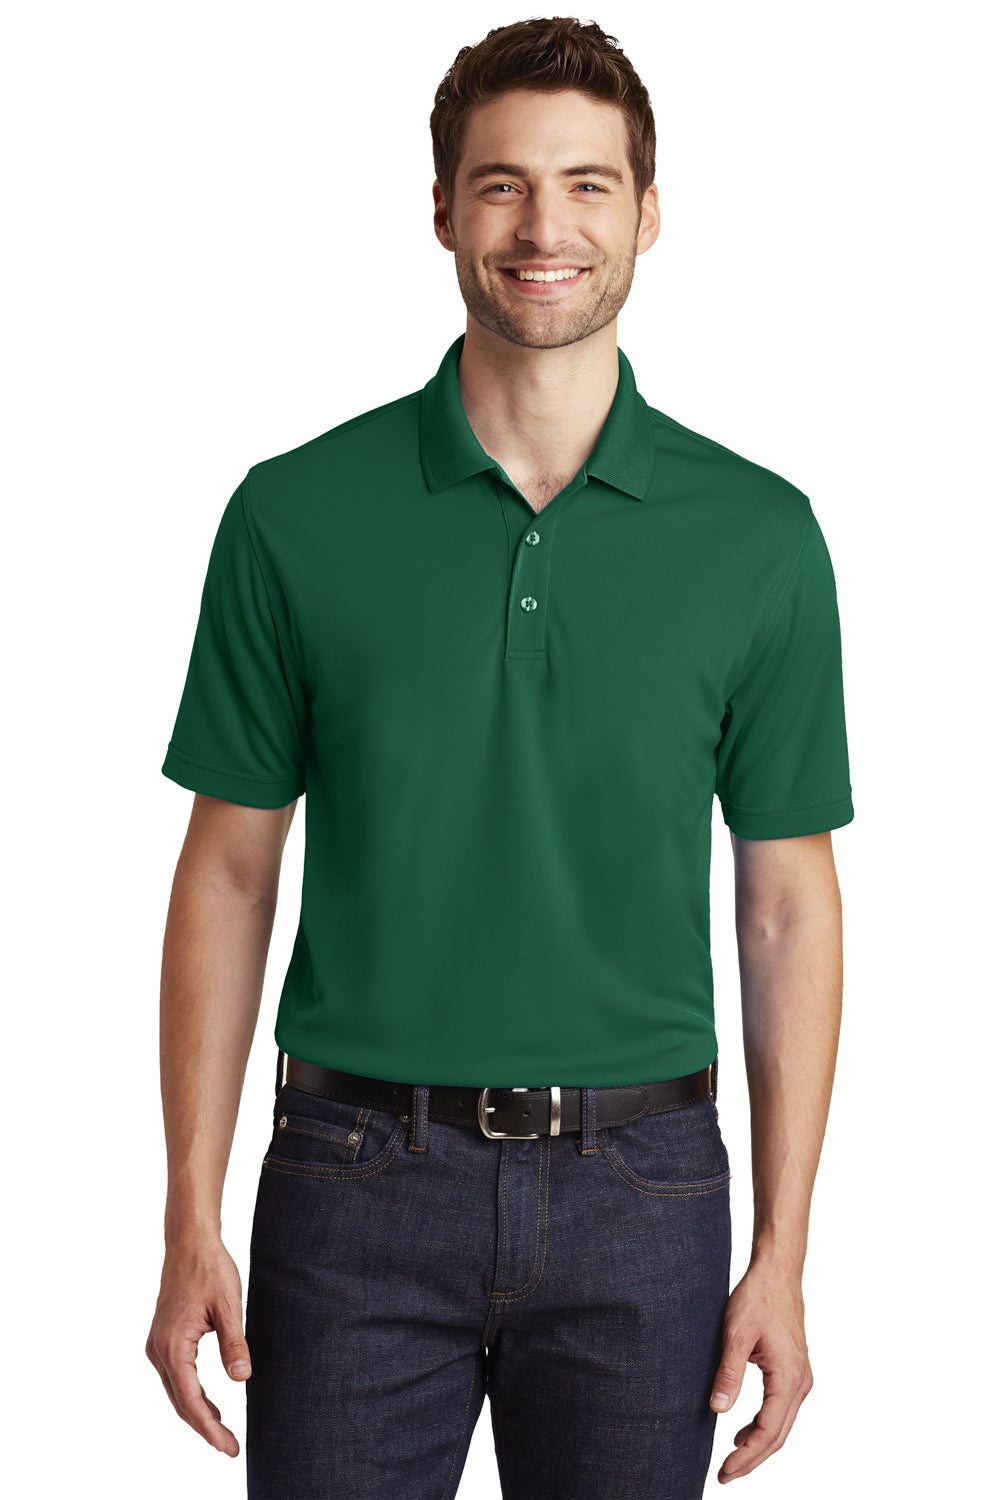 Port Authority K110 Mens Dry Zone Moisture Wicking Short Sleeve Polo Shirt Forest Green Front